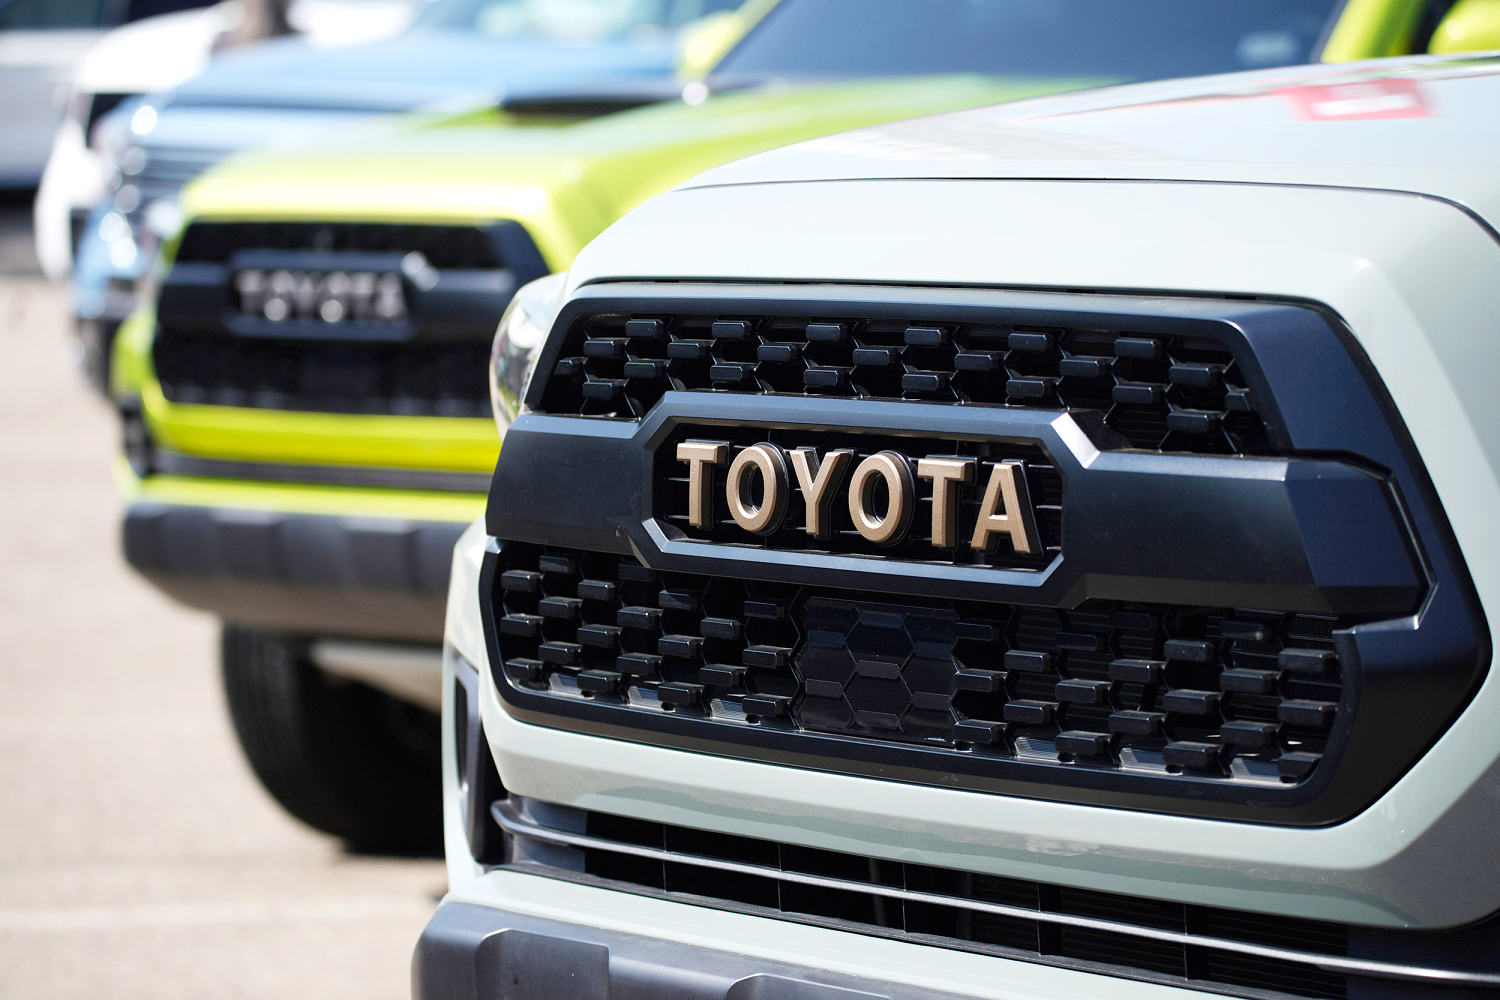 Toyota recalling 381,000 Tacoma pickups because parts can fall off rear axles